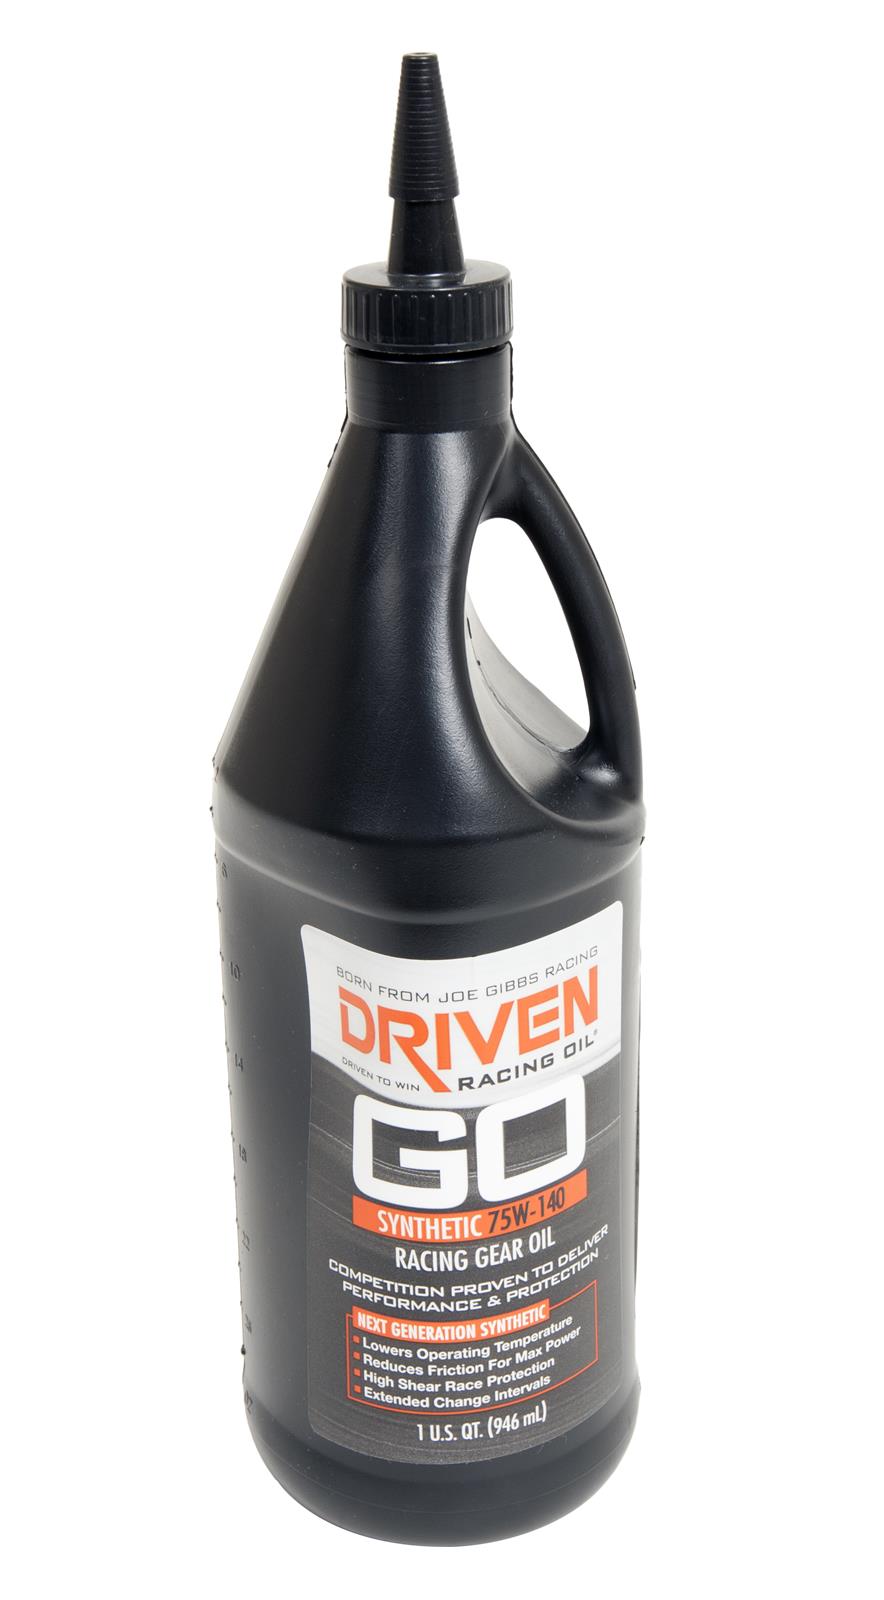 Driven Racing Oil 04330 75w140 Synthetic Gear Oil Quart